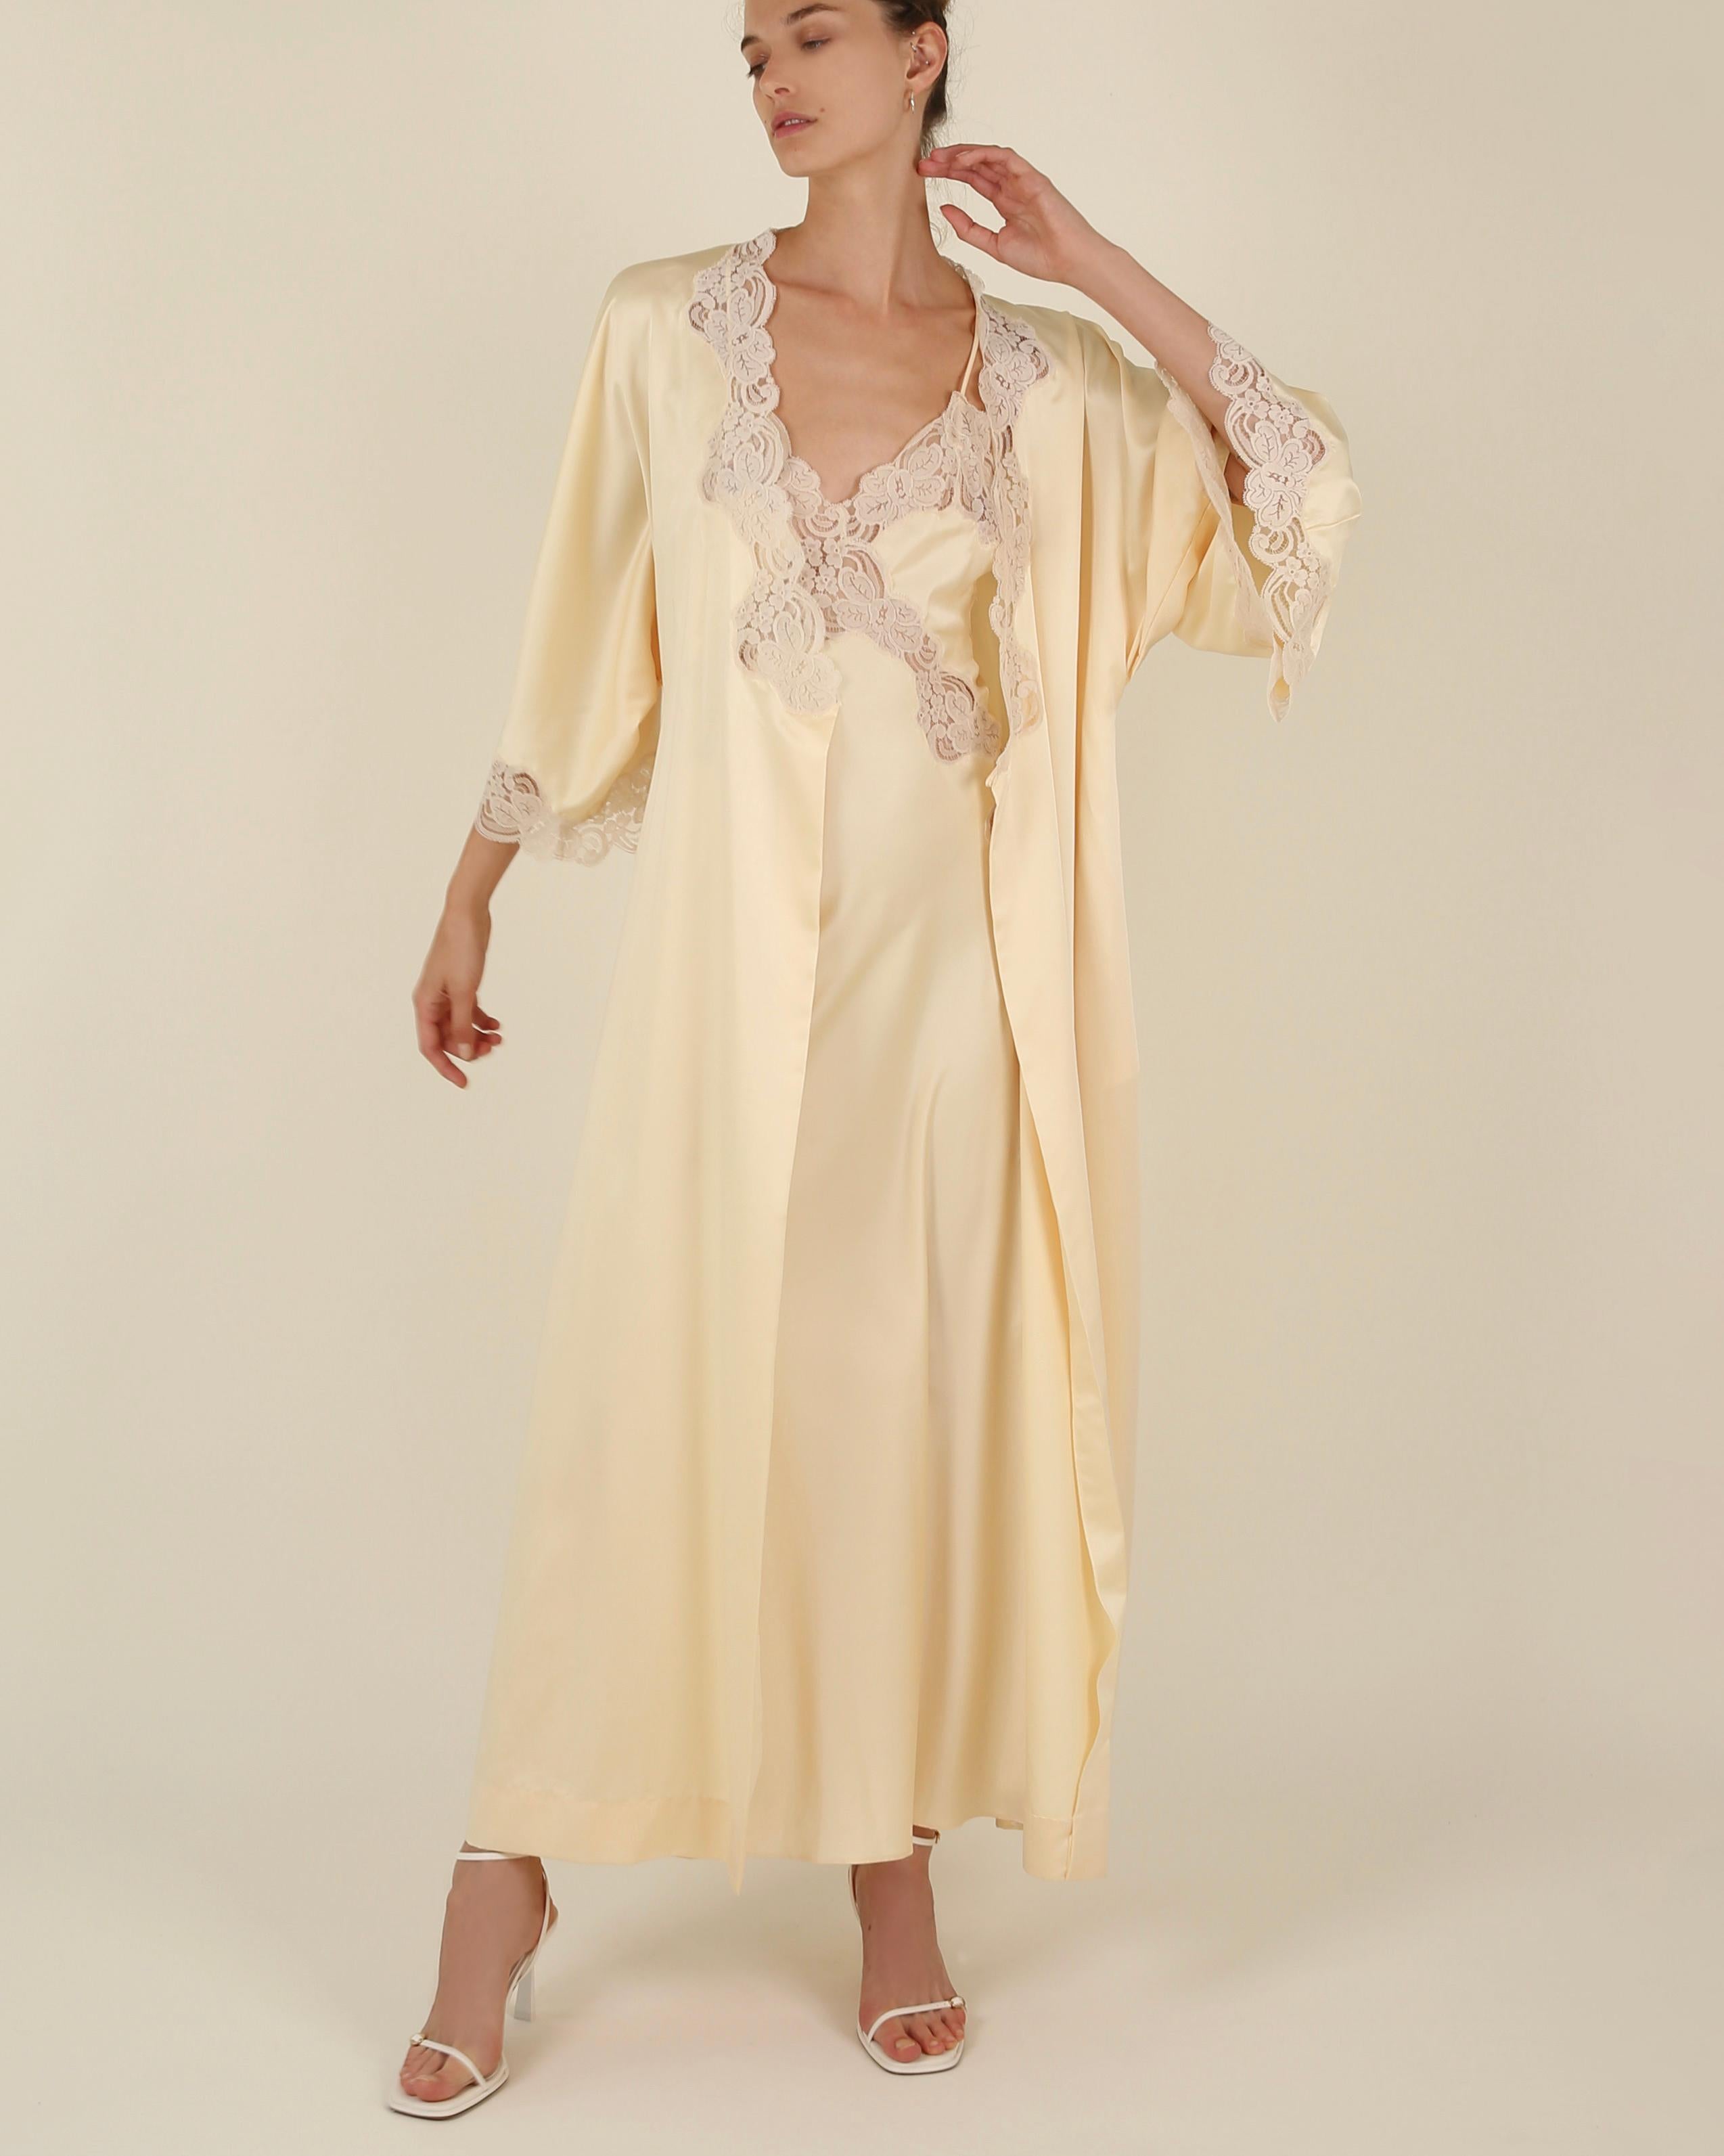 Vintage 1970's silk lace yellow backless thigh slit night gown slip dress & robe 9